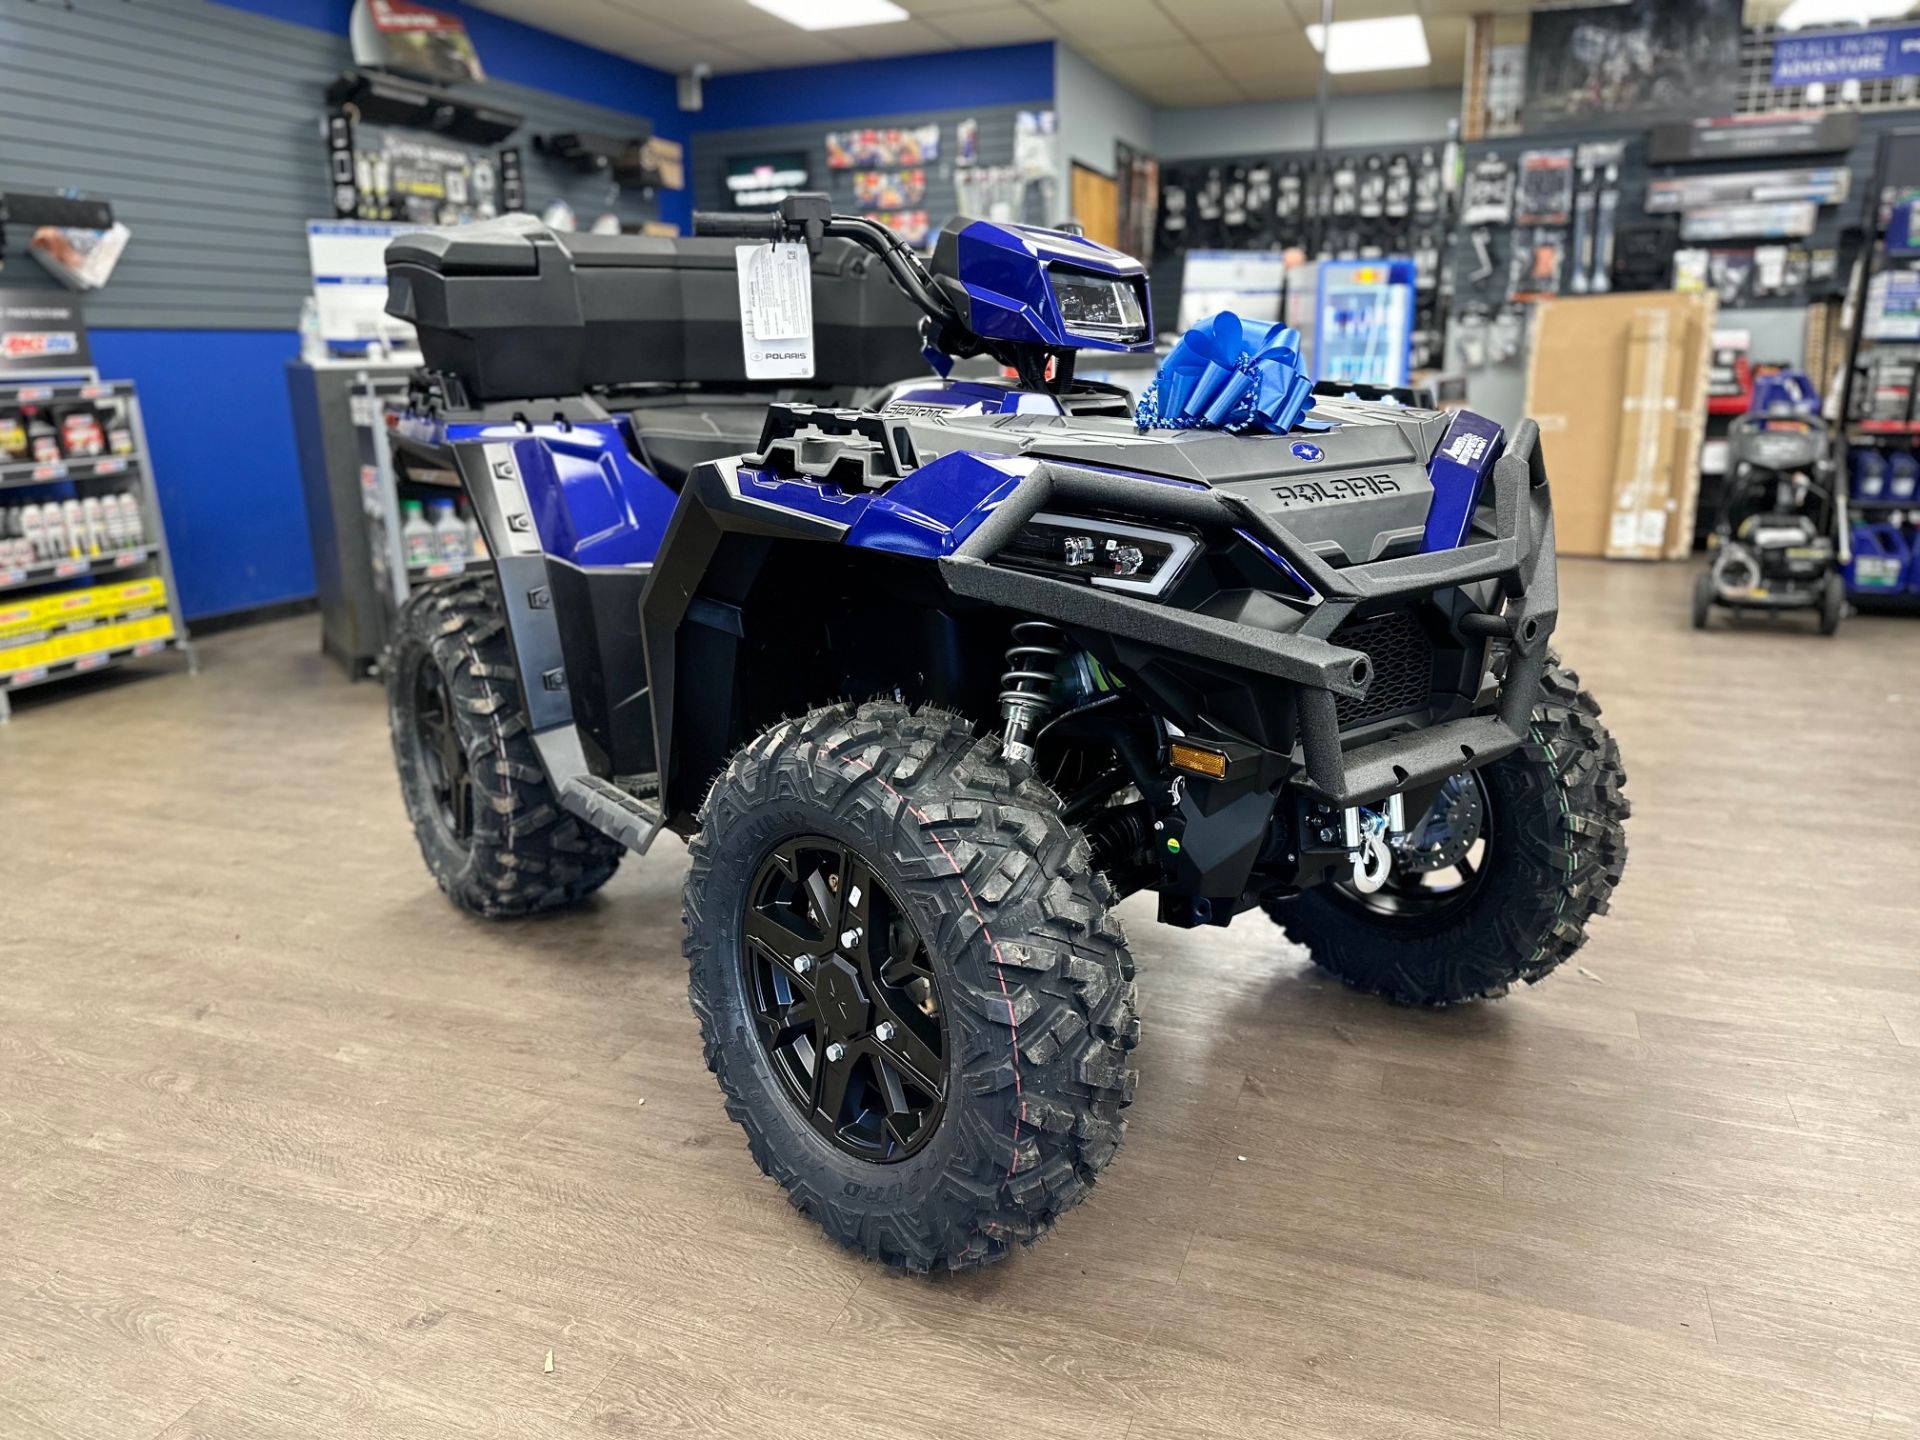 2024 Polaris Sportsman 850 Ultimate Trail in Milford, New Hampshire - Photo 1